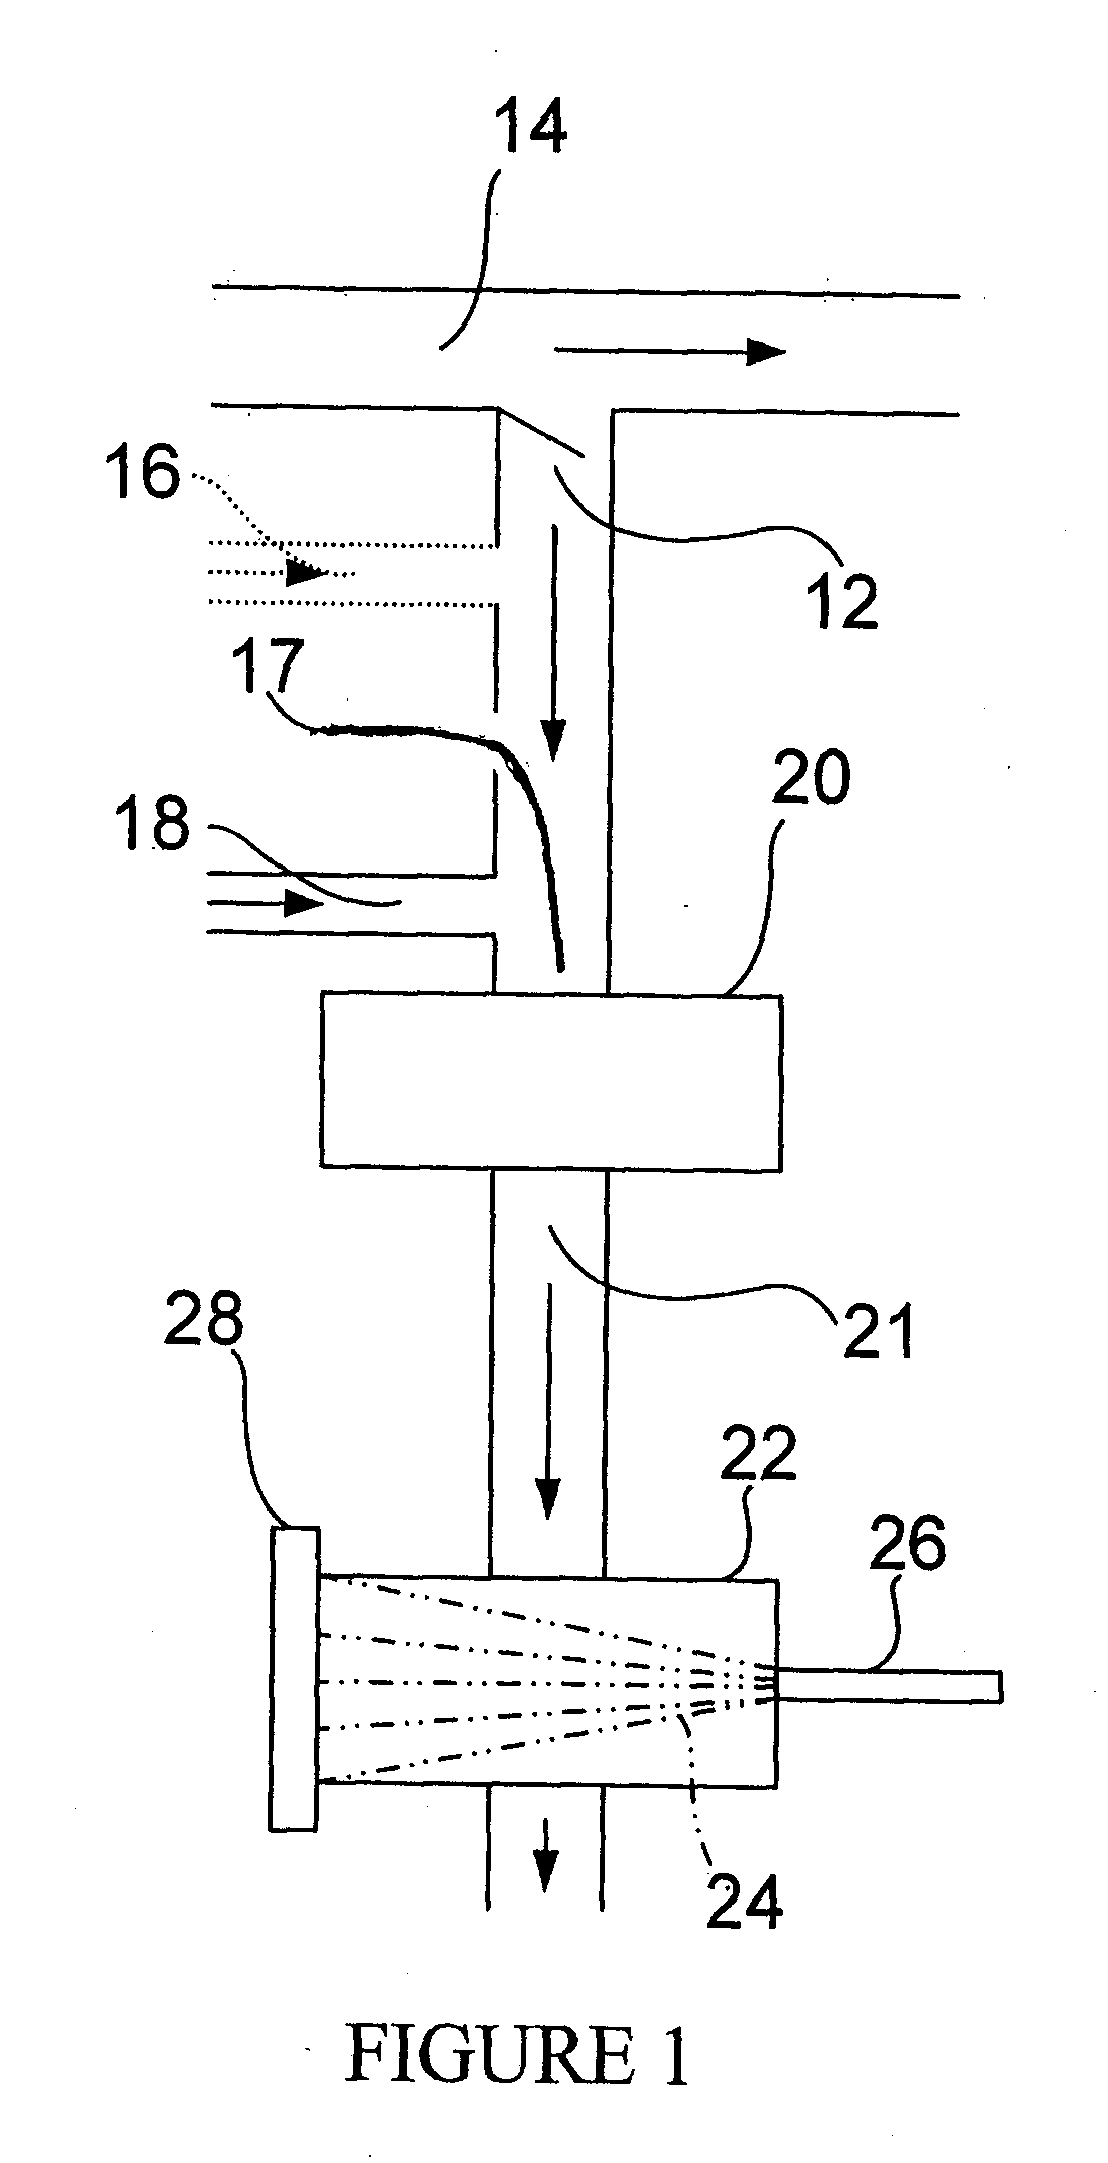 Method for Measuring Hydrophobic Contaminants in Paper Pulp